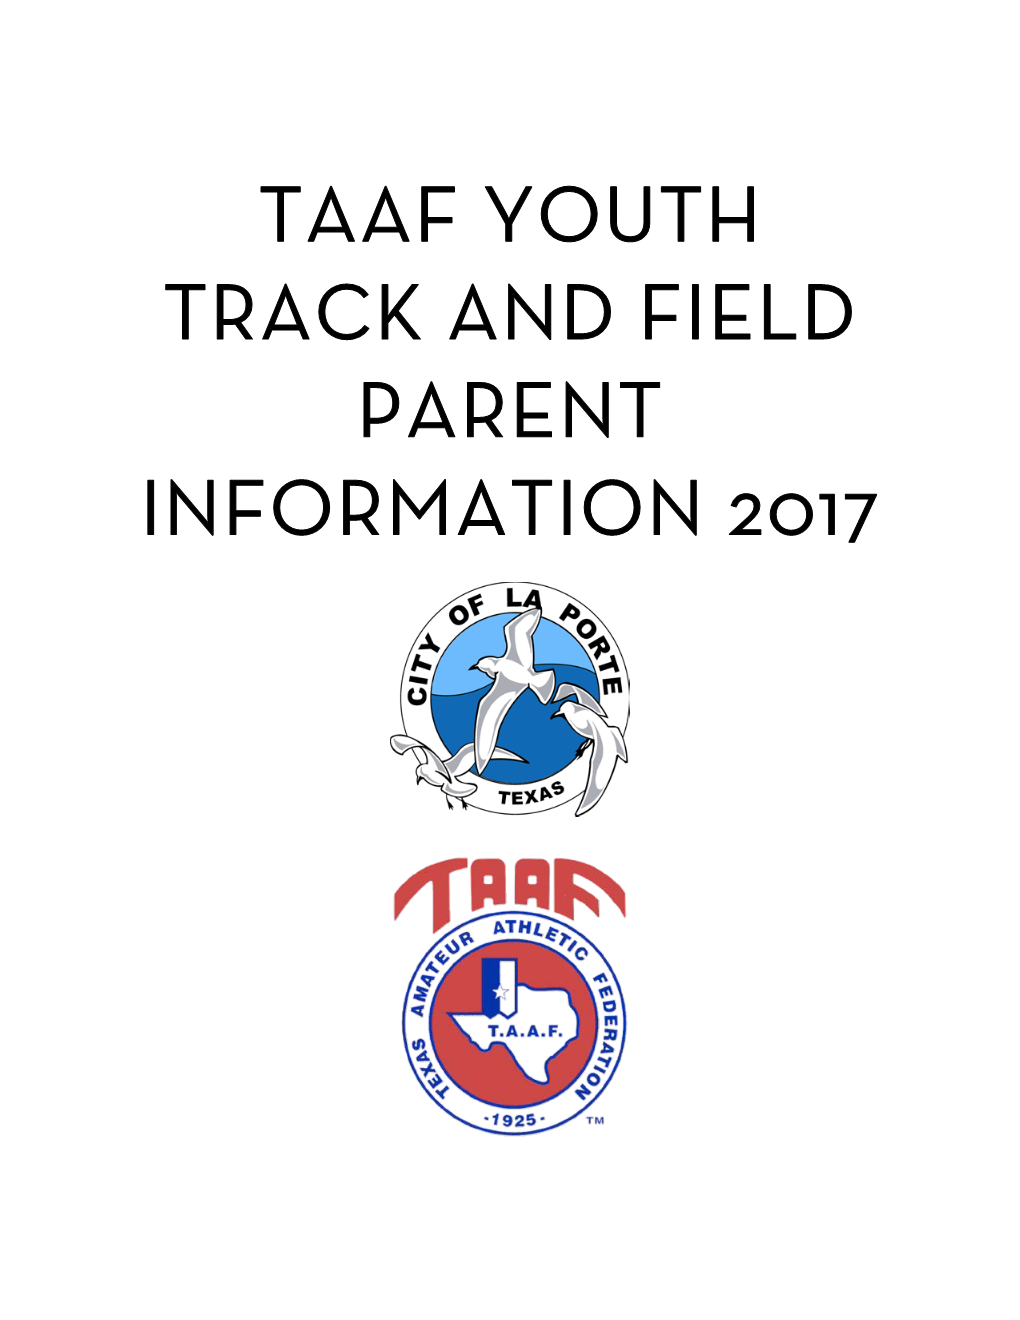 Taaf Youth Track and Field Parent Information 2017